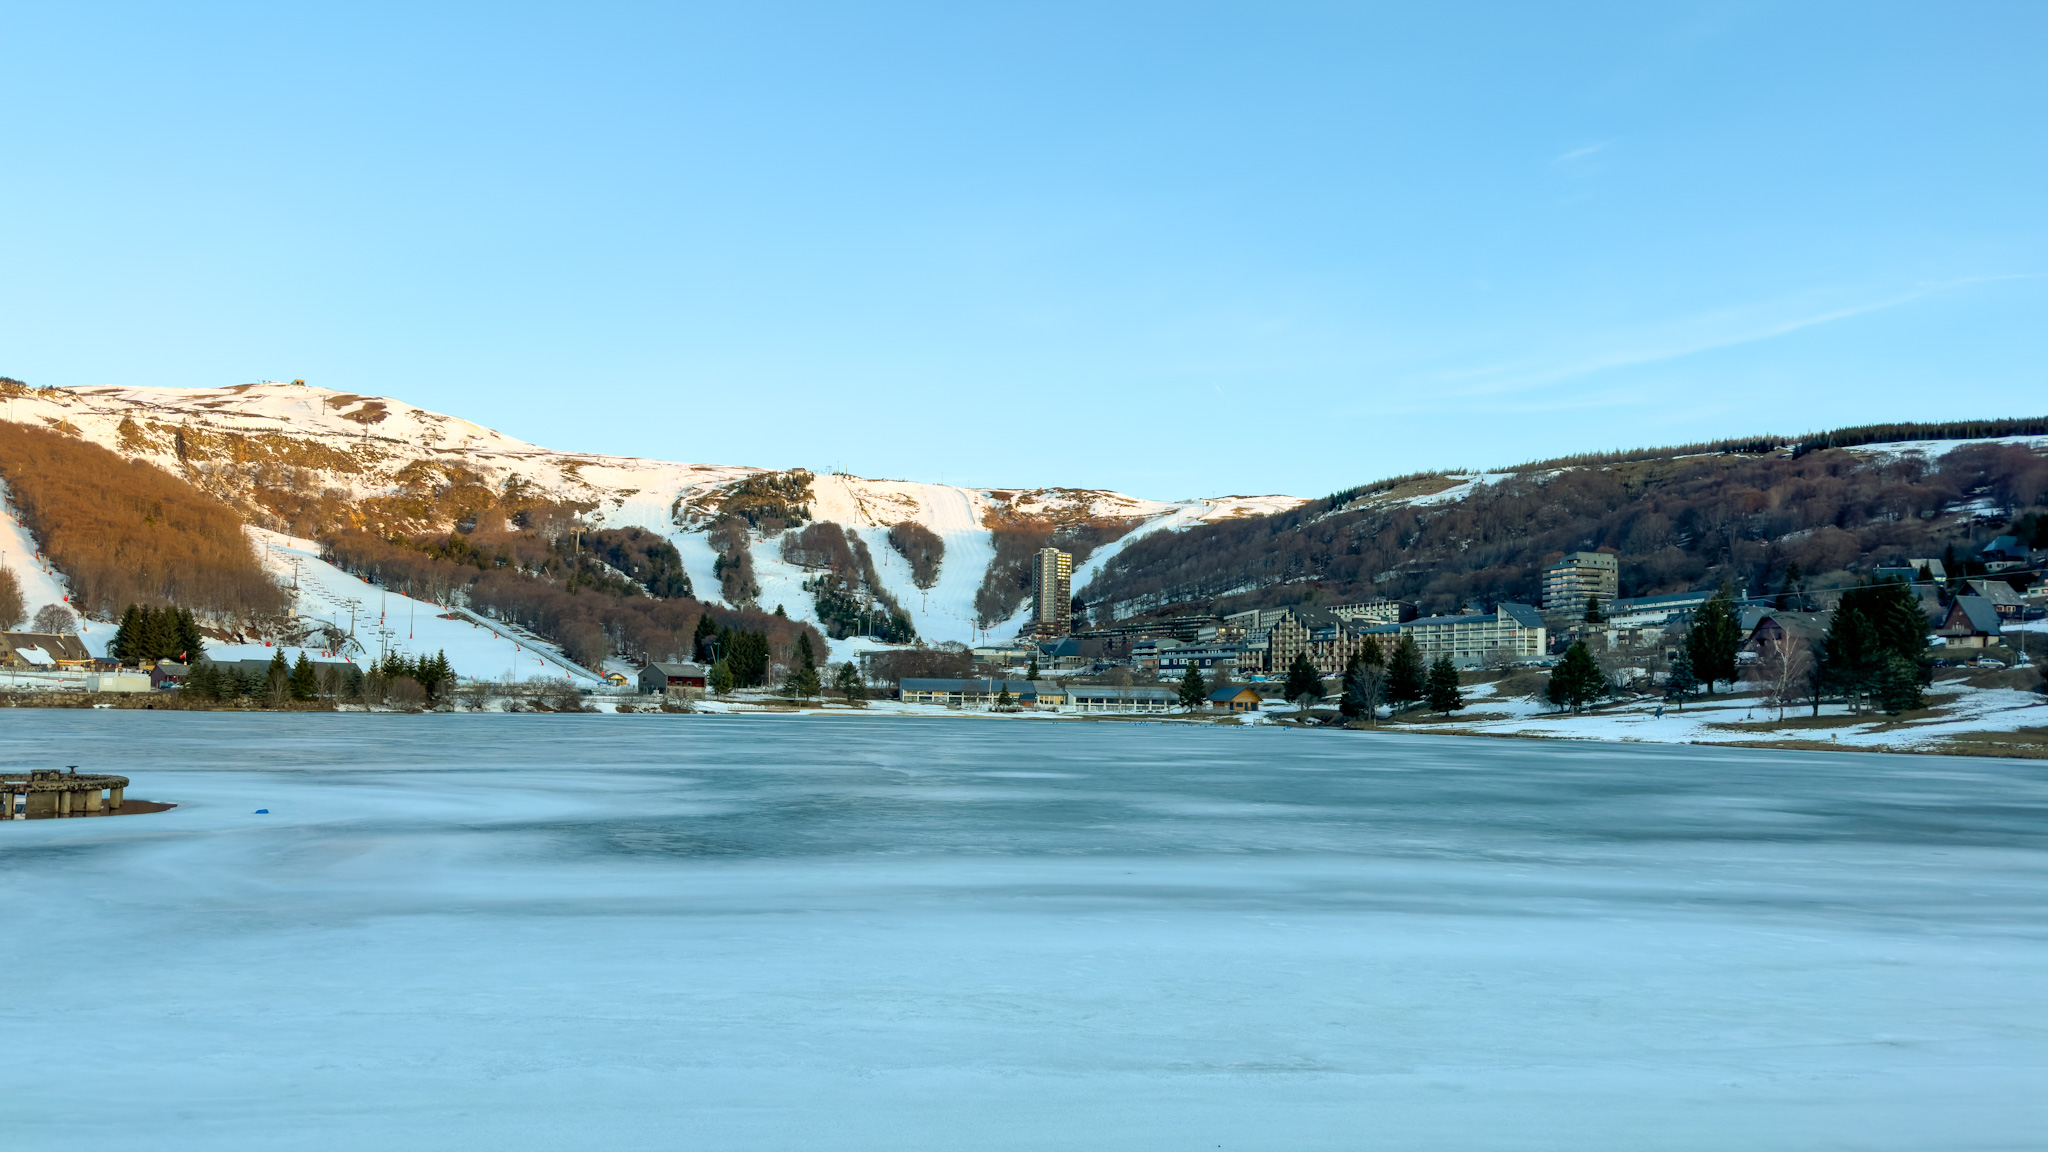 From the Lac des Hermines, panorama of the town center of Super Besse under a winter sun